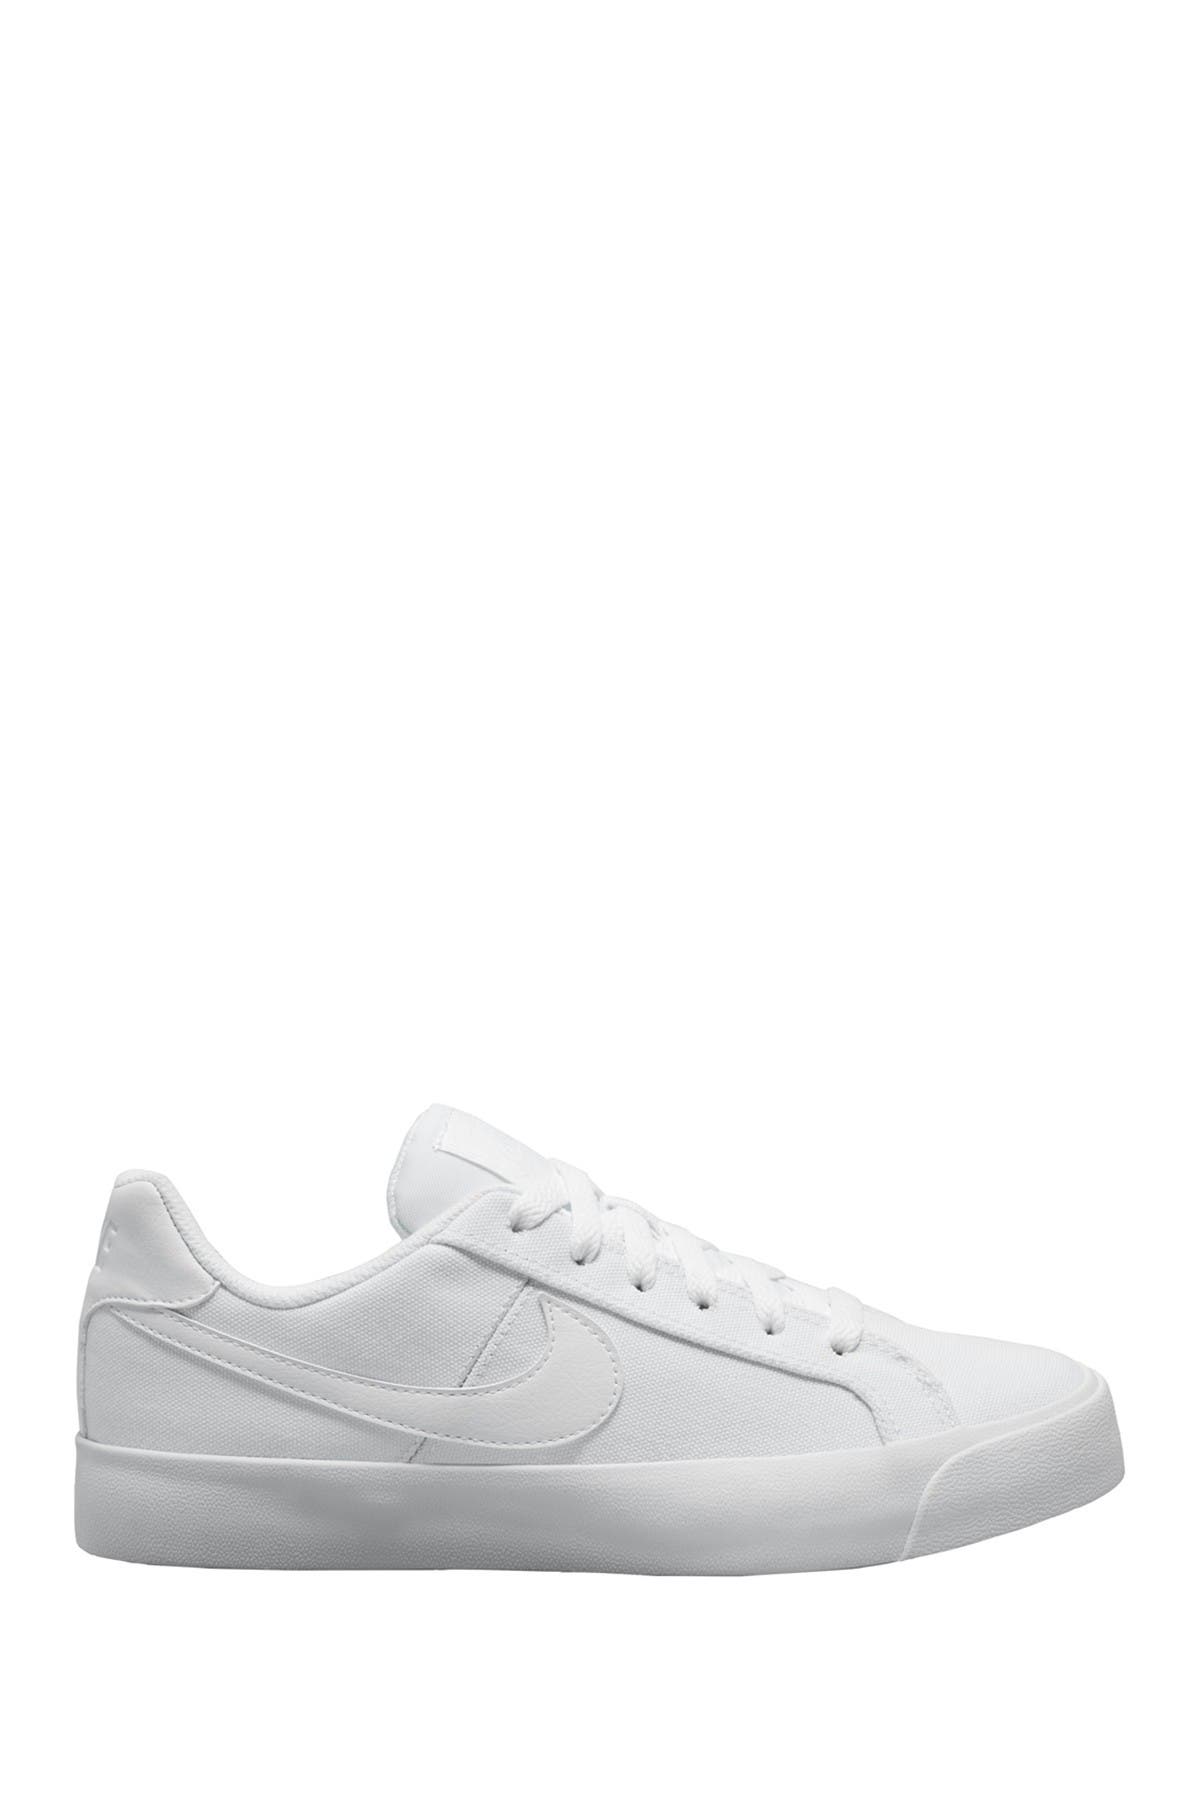 all white nike court royale